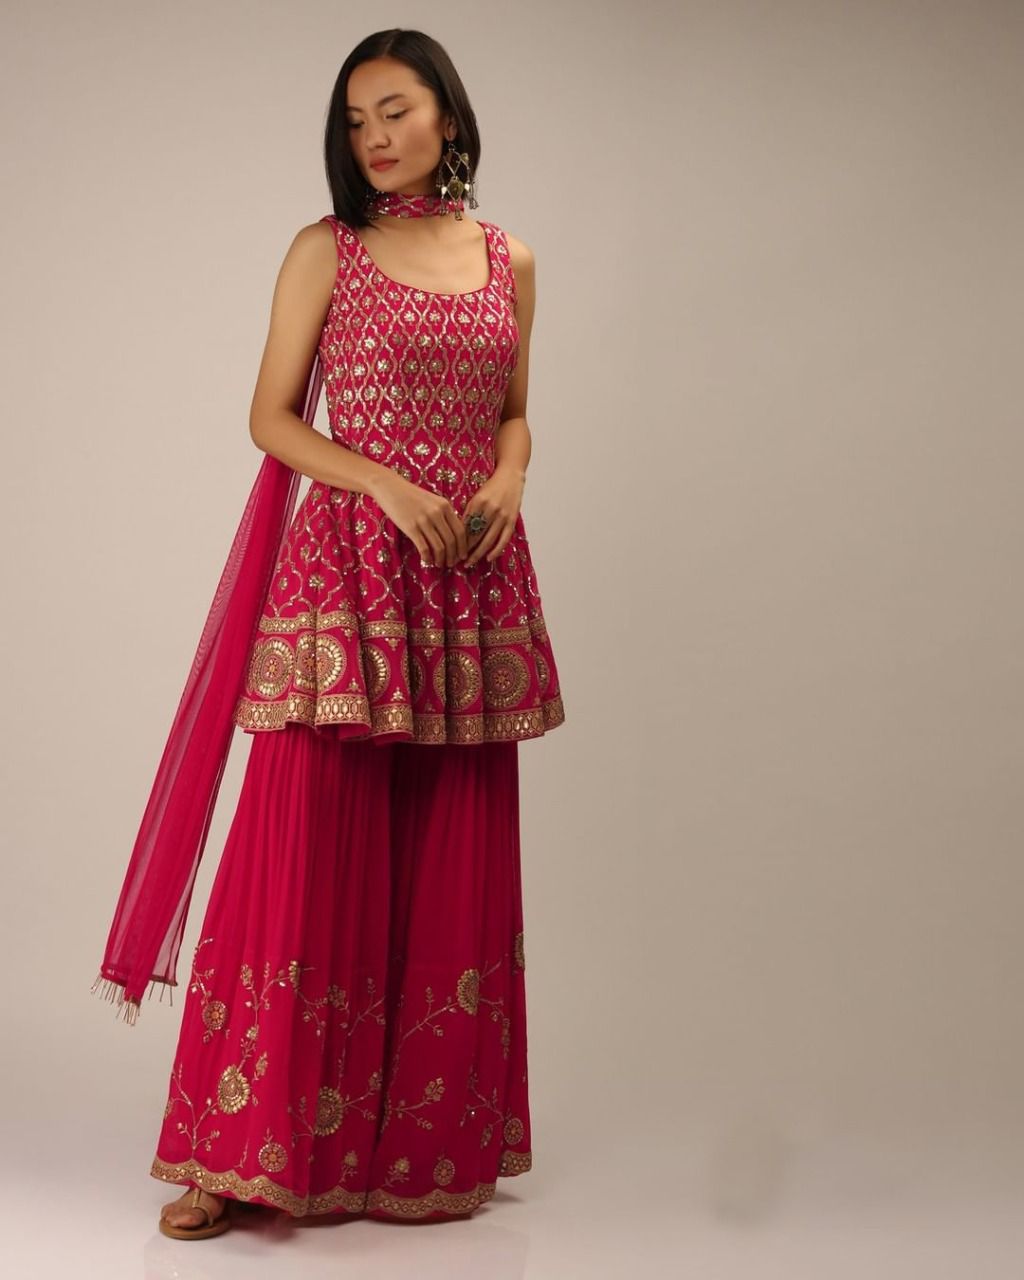 Rani Pink Sharara Suit In Georgette Silk With Embroidery Work